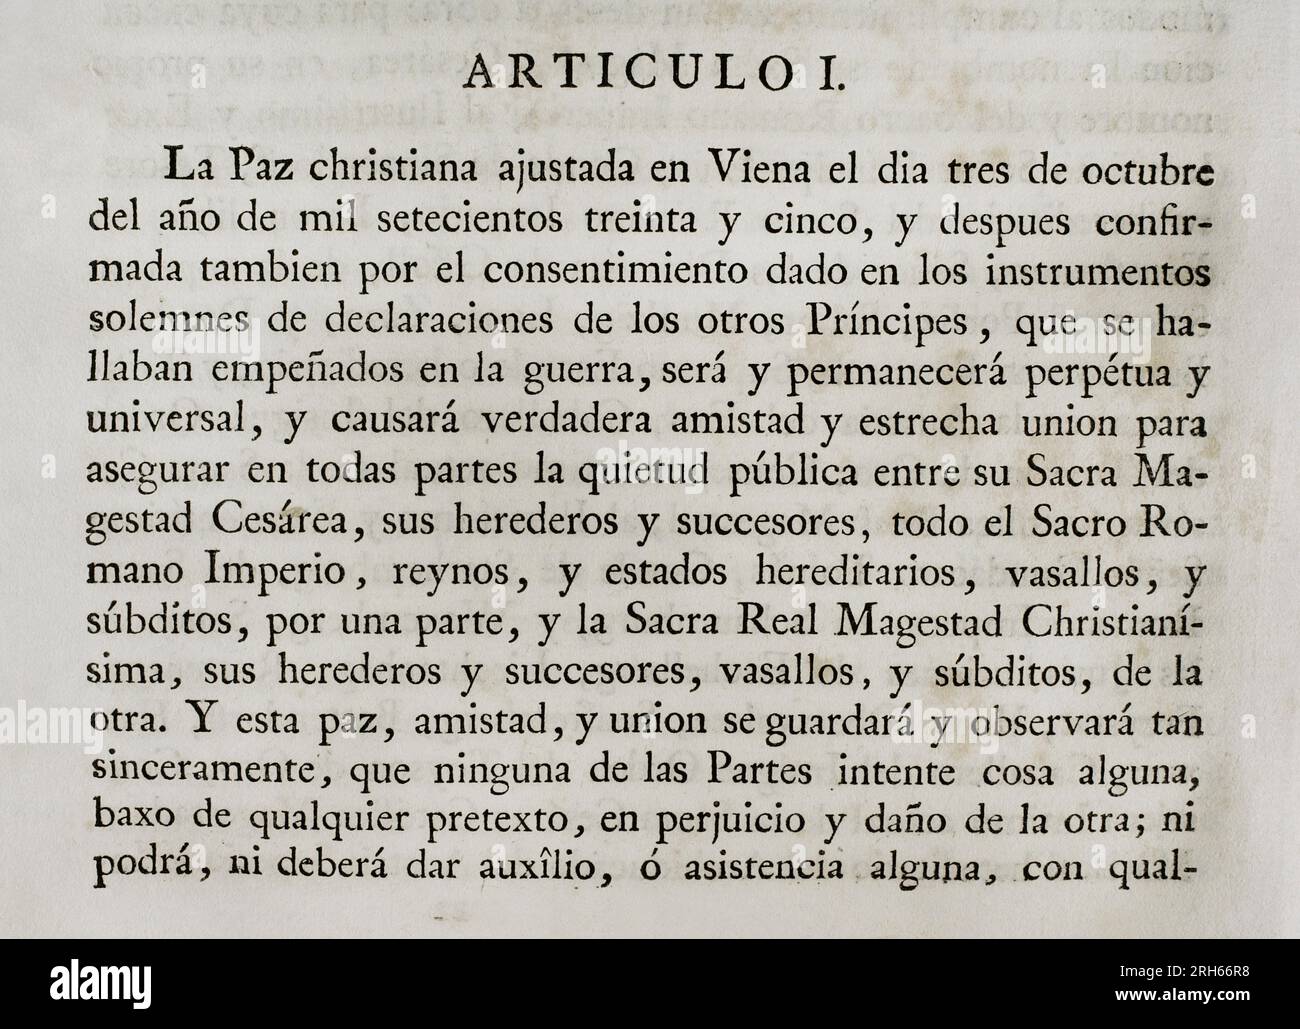 Accession by King Philip V of Spain to the Treaty of Vienna (18 November 1738) between Emperor Charles VI of Germany and Louis XV of France to end the War of the Polish Succession (1733-1735). Spain acceded the following year, signing at Versailles on 21 April 1739. It was ratified by King Philip V at Aranjuez the following 13 May. Article I. Collection of the Treaties of Peace, Alliance, Commerce adjusted by the Crown of Spain with the Foreign Powers (Coleccion de los Tratados de Paz, Alianza, Comercio ajustados por la Corona de Espana con las Potencias Extranjeras). Volume II. Madrid, 1800. Stock Photo